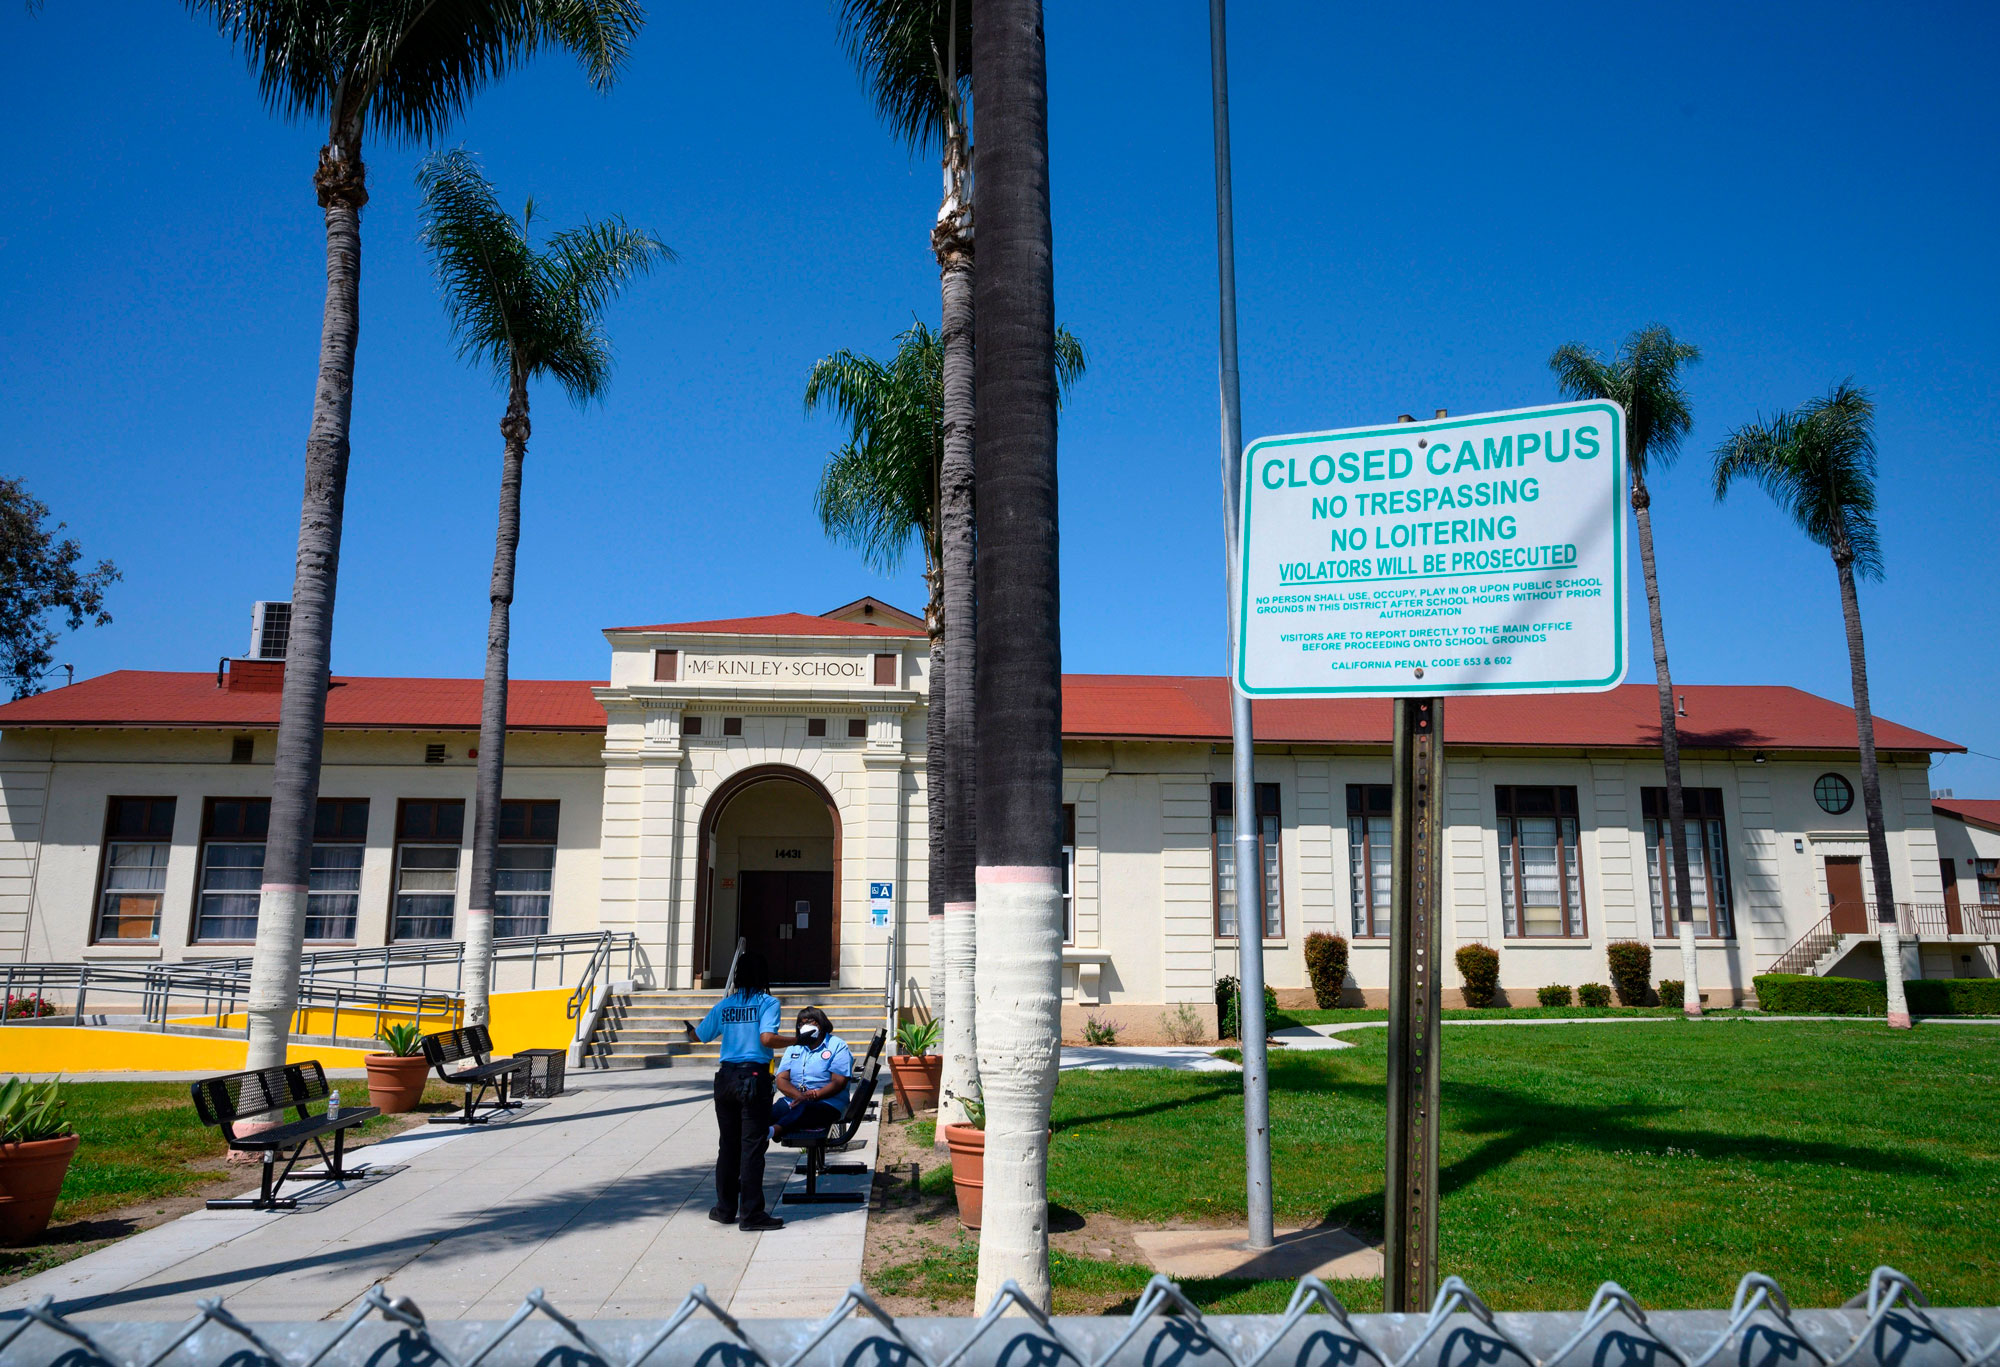 Two security guards talk on the campus of the closed McKinley School, part of the Los Angeles Unified School District system, in Compton, California, on April 28.